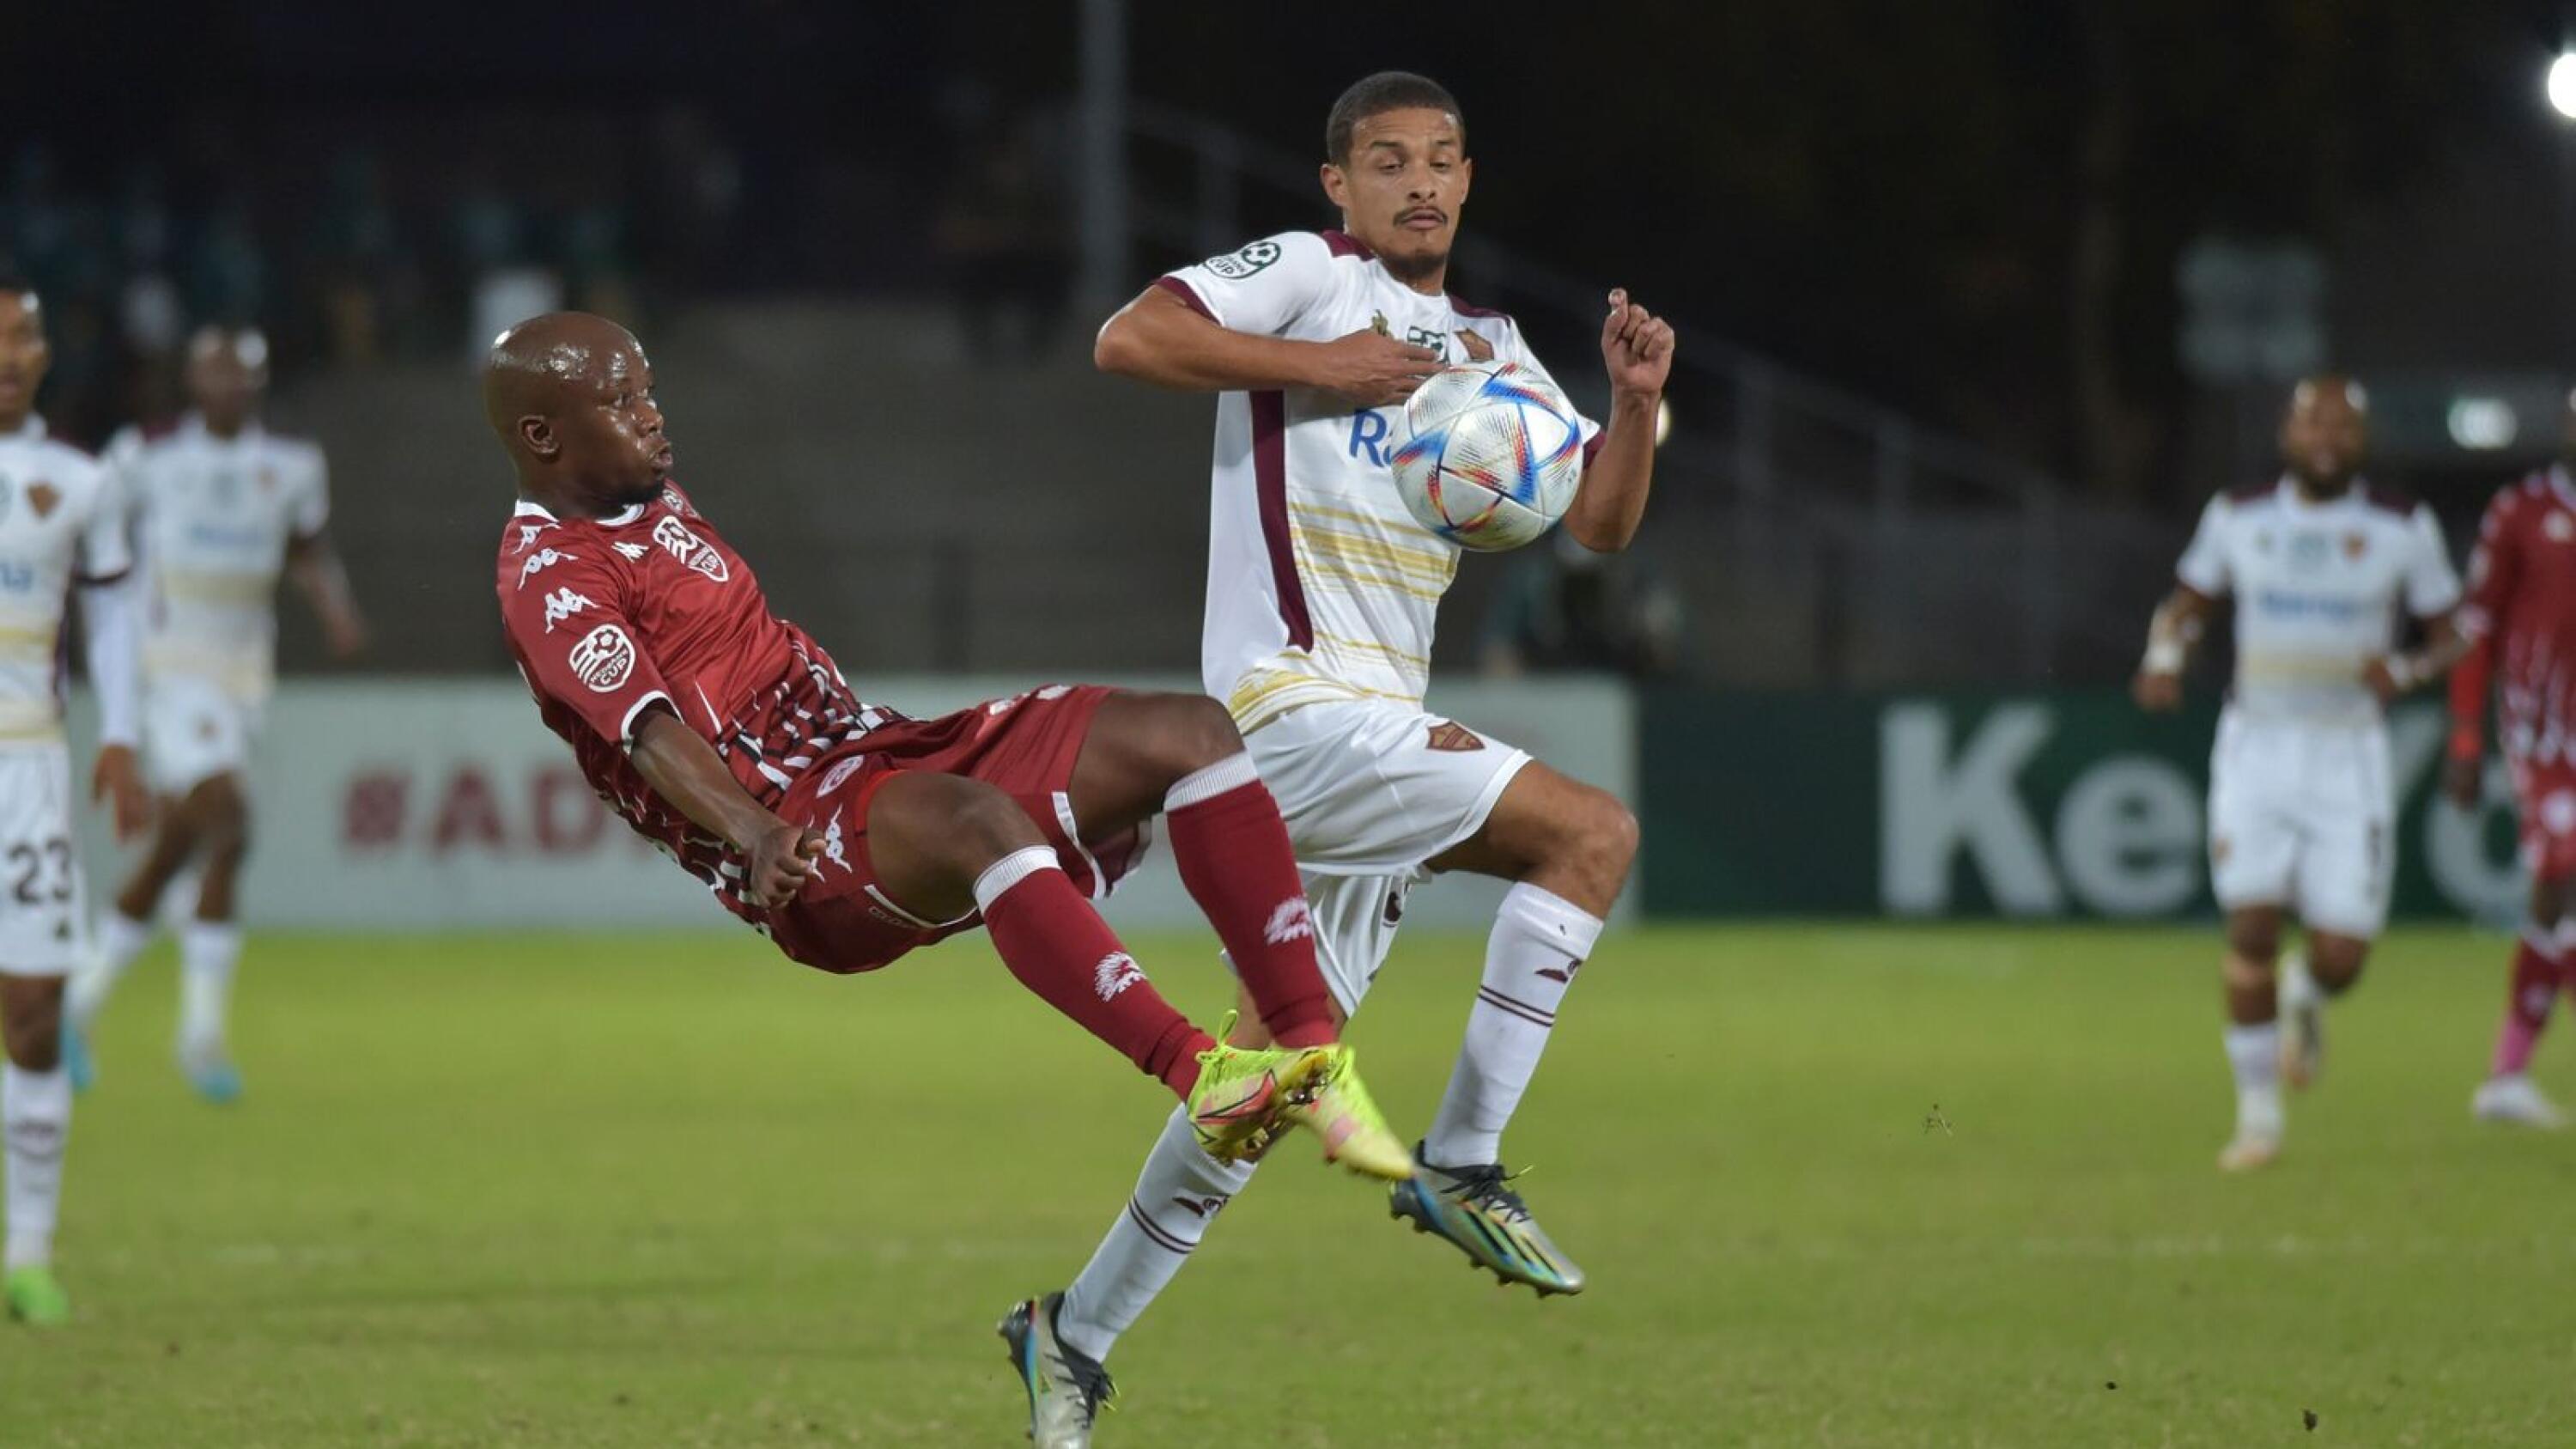 Siphosakhe Ntiya Ntiya of Sekhukhune United clears ball away from Devin Titus of Stellenbosch FC during their Nedbank Cup semi-final at Danie Craven Stadium in Stellenbosch on Sunday